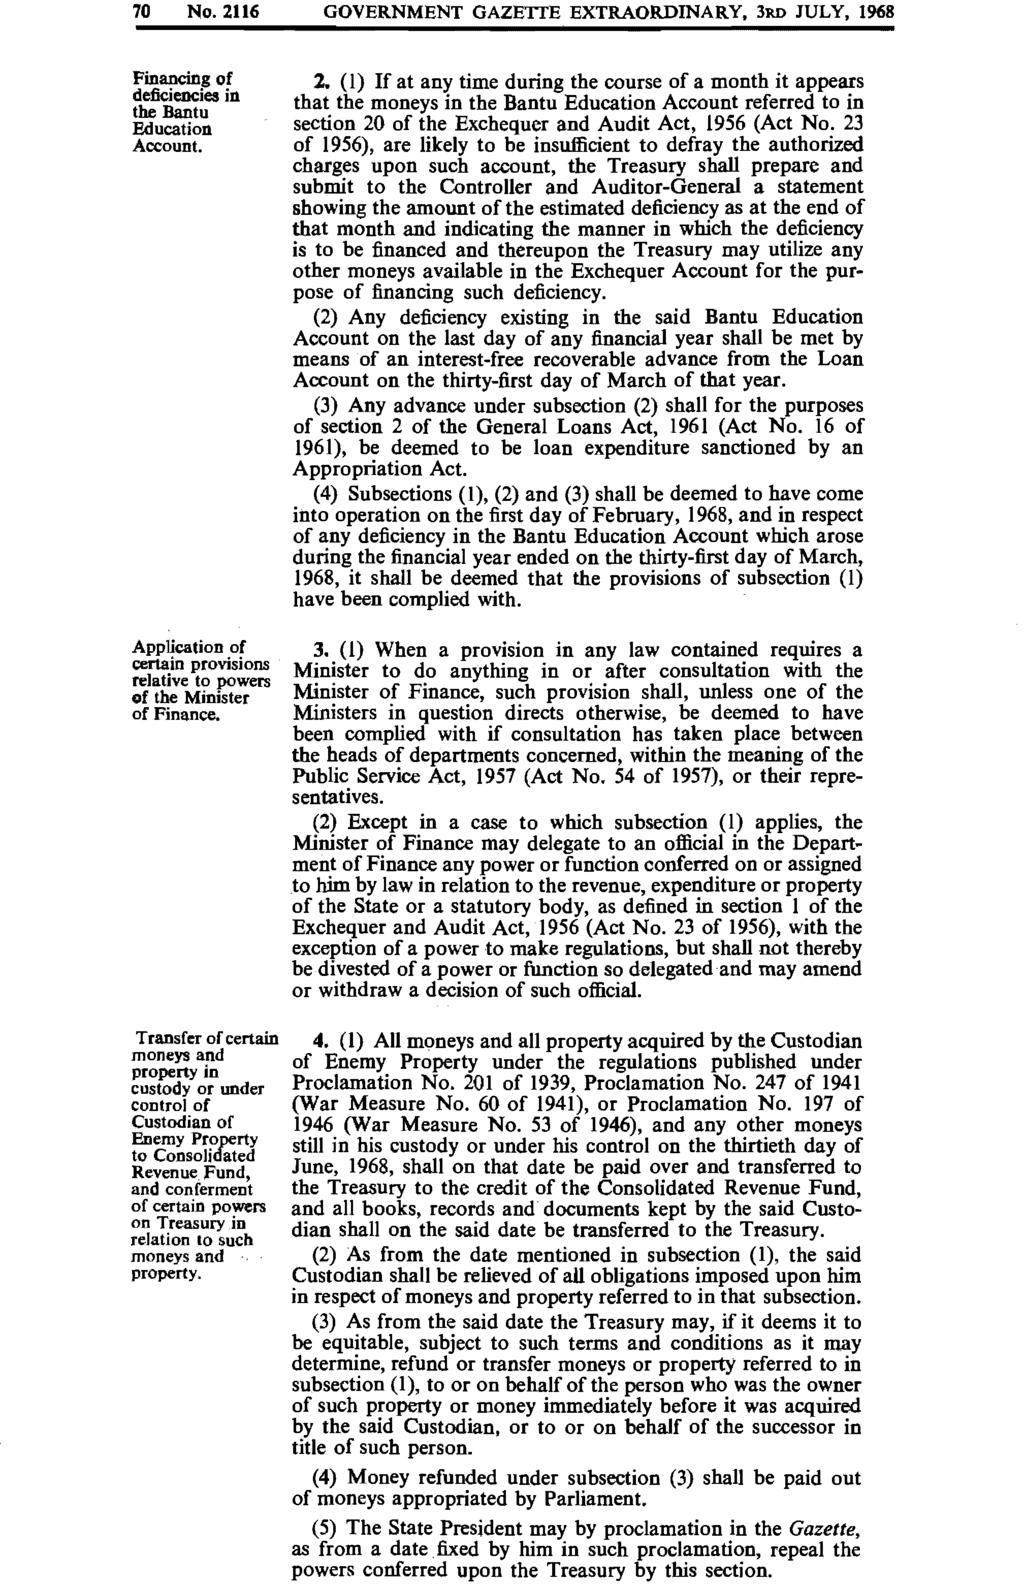 70 No. 2116 GOVERNMENT GAZETTE EXTRAORDINARY, 3RD JULY, 1968 Financing of deficiencies in the Bantu Education Account. Application of certain provisions relative to powers of the Minister of Finance.